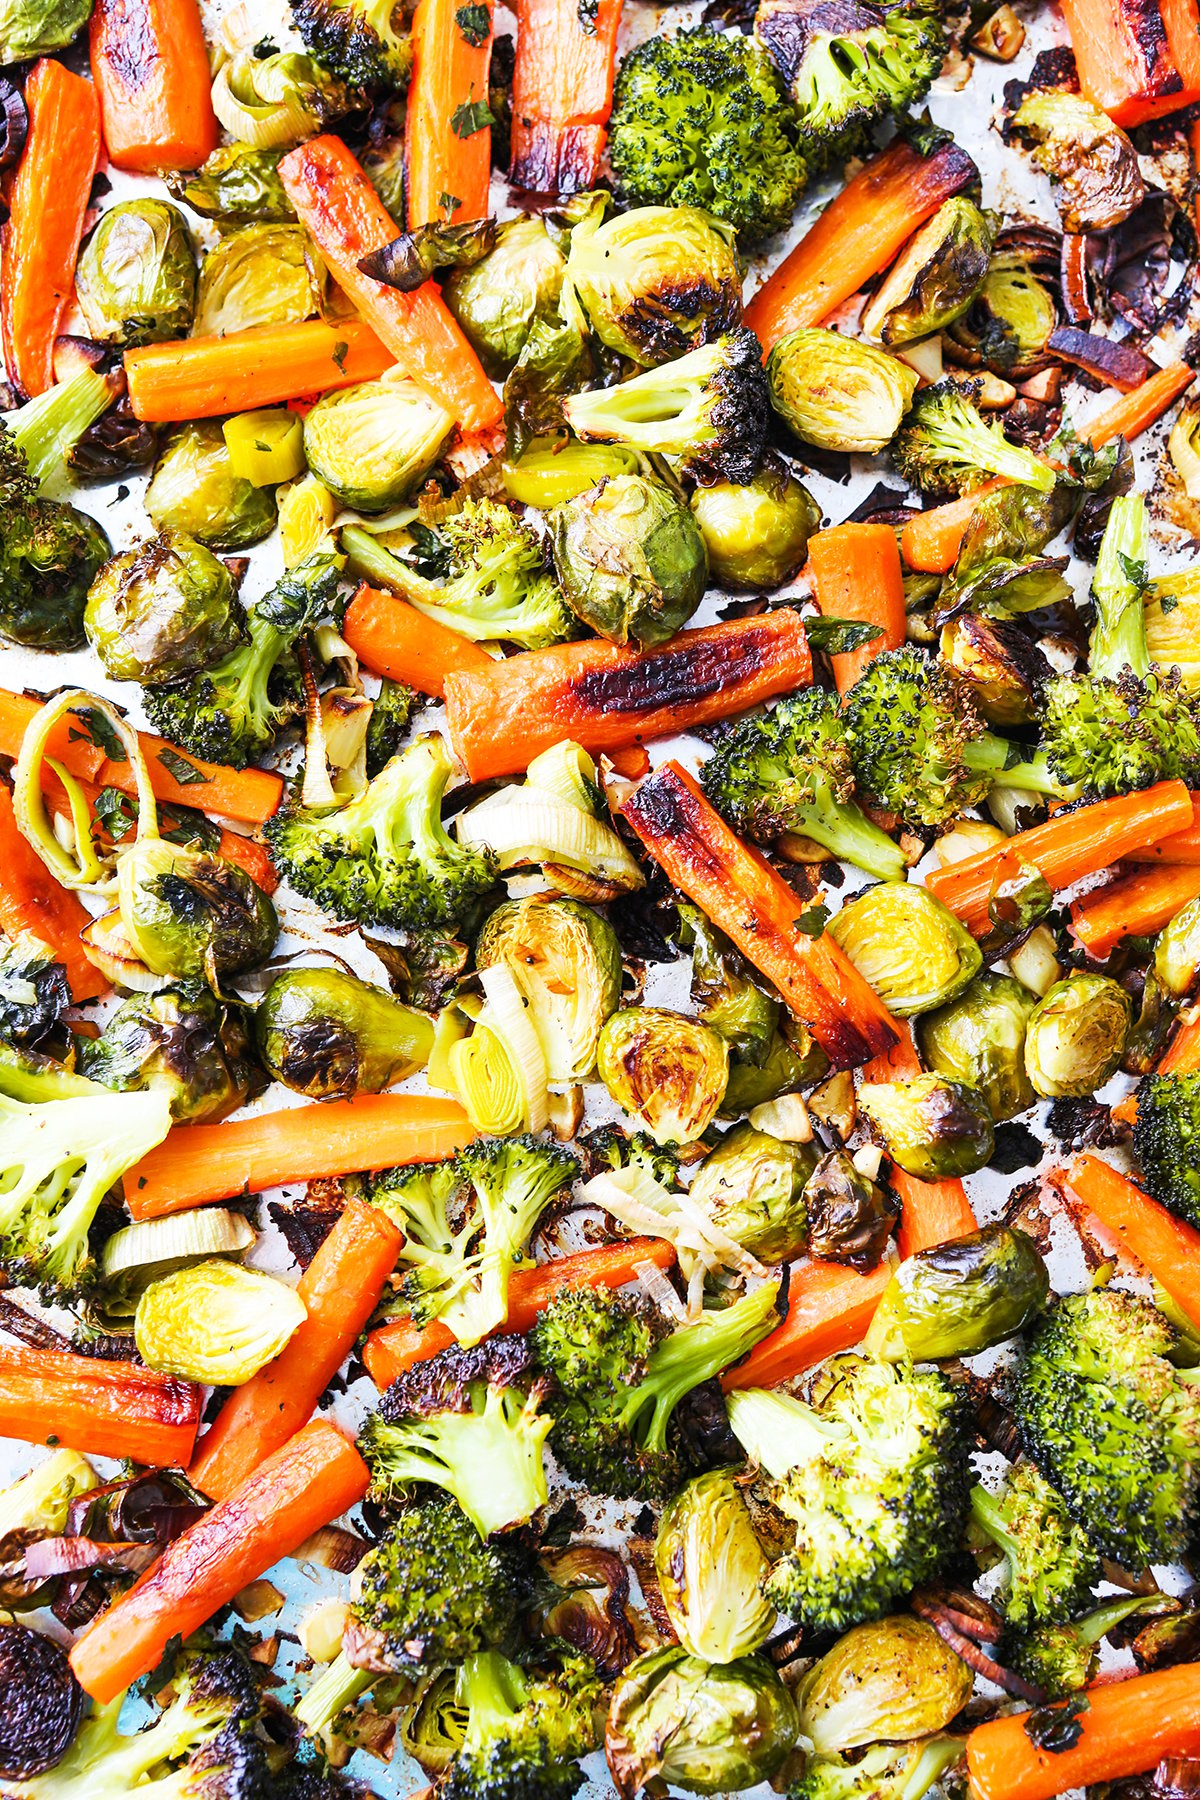  top view close up of roasted veggies such as broccoli and carrots.